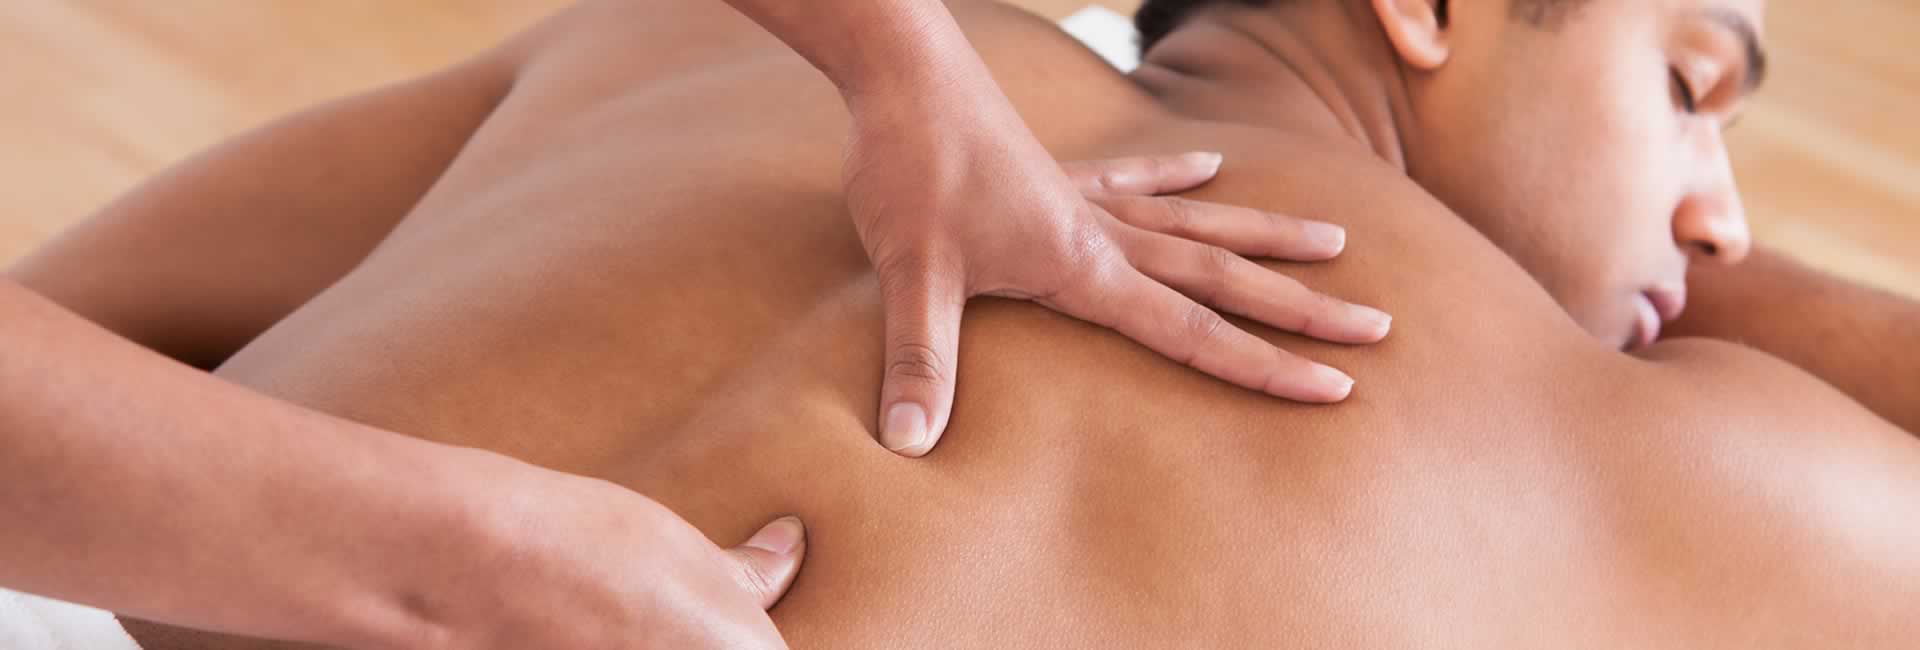 Massage for Back Pain Manchester